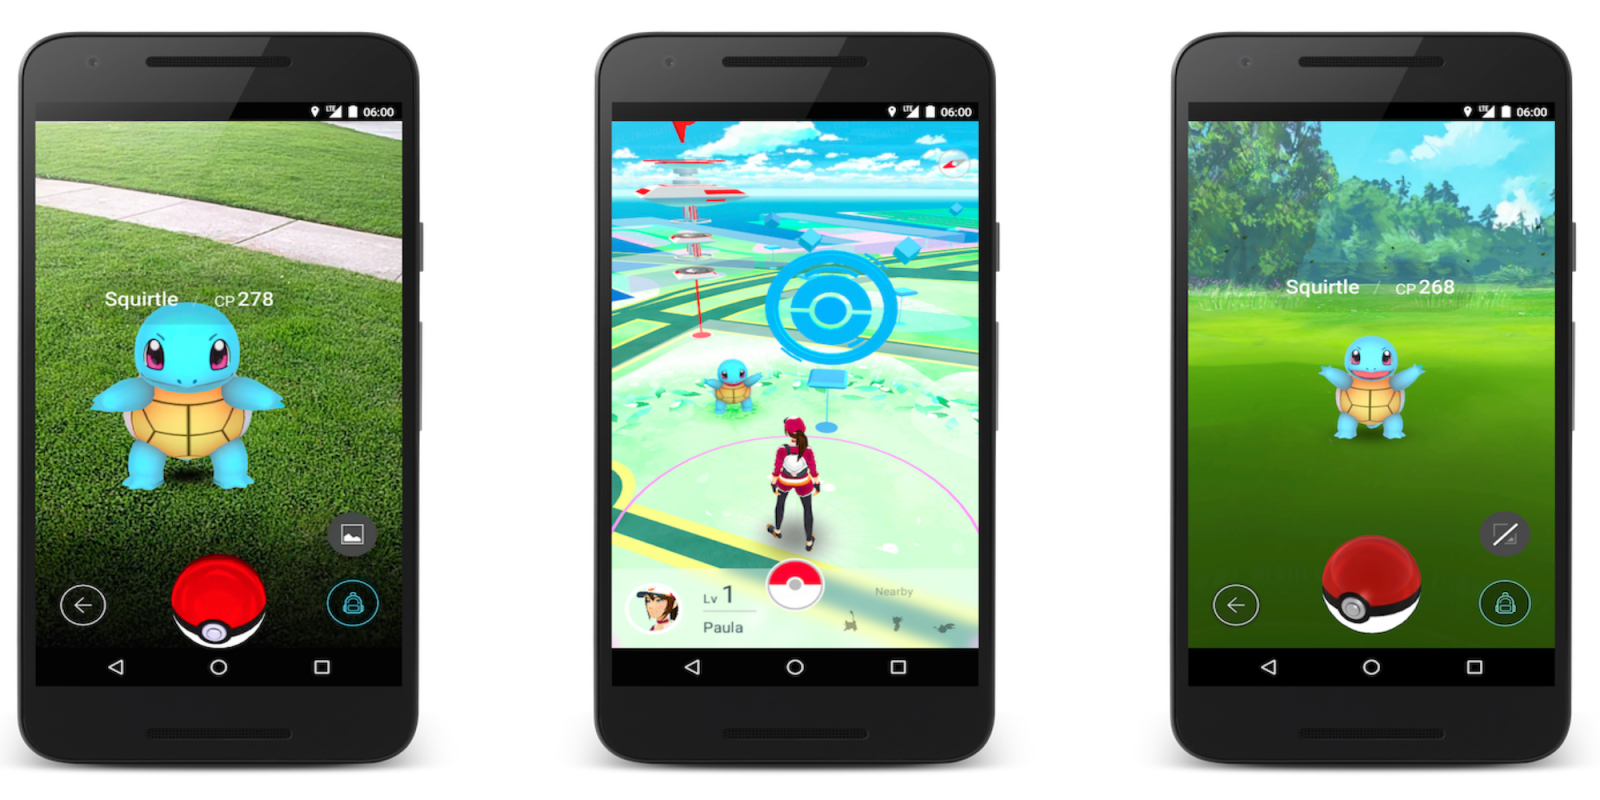 Pokémon Go now available on Android in select countries - 9to5Google